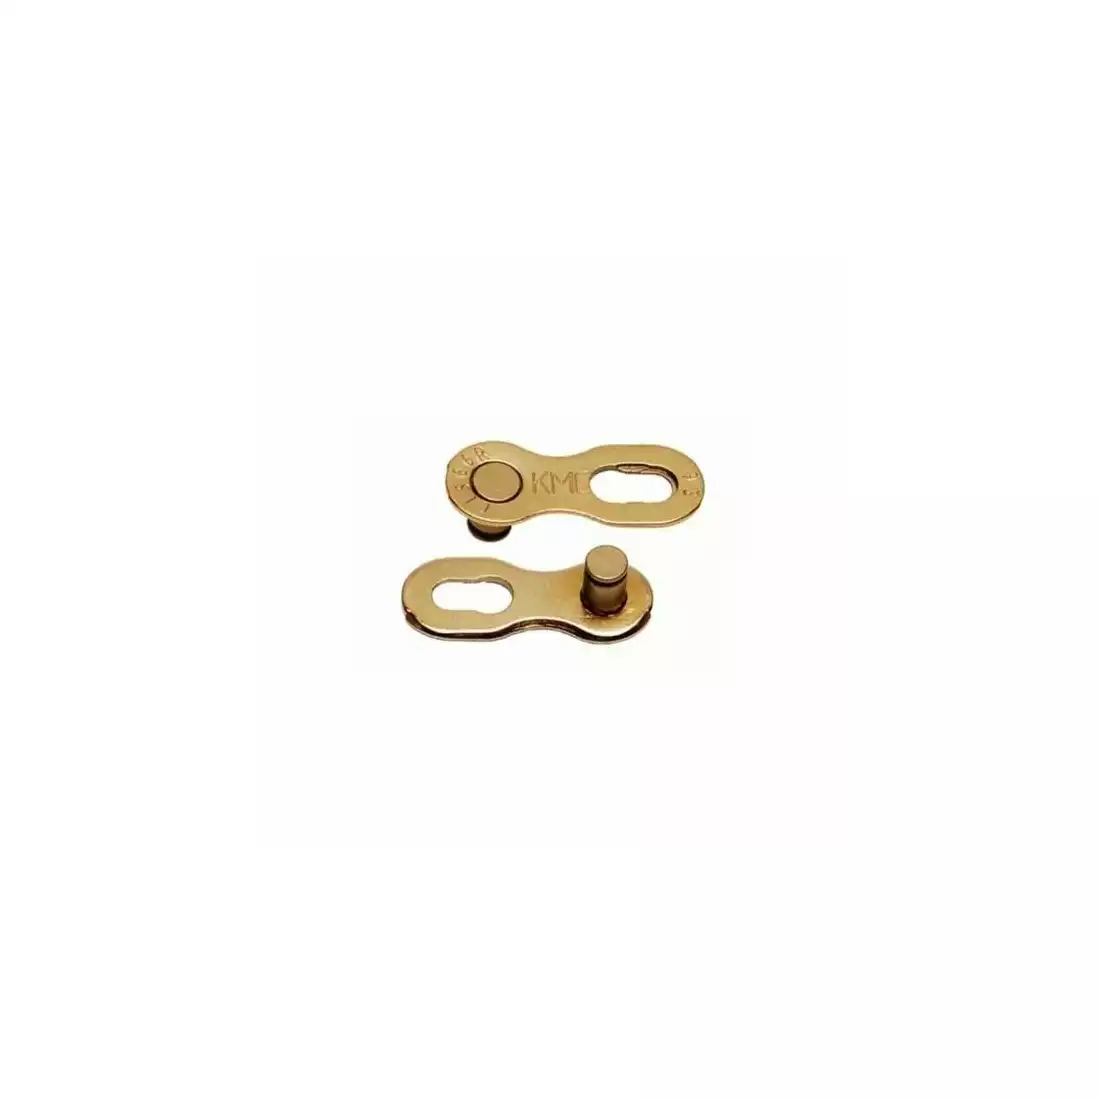 KMC CL-566 Ti-N 9-speed chain clip, 2 pieces, gold